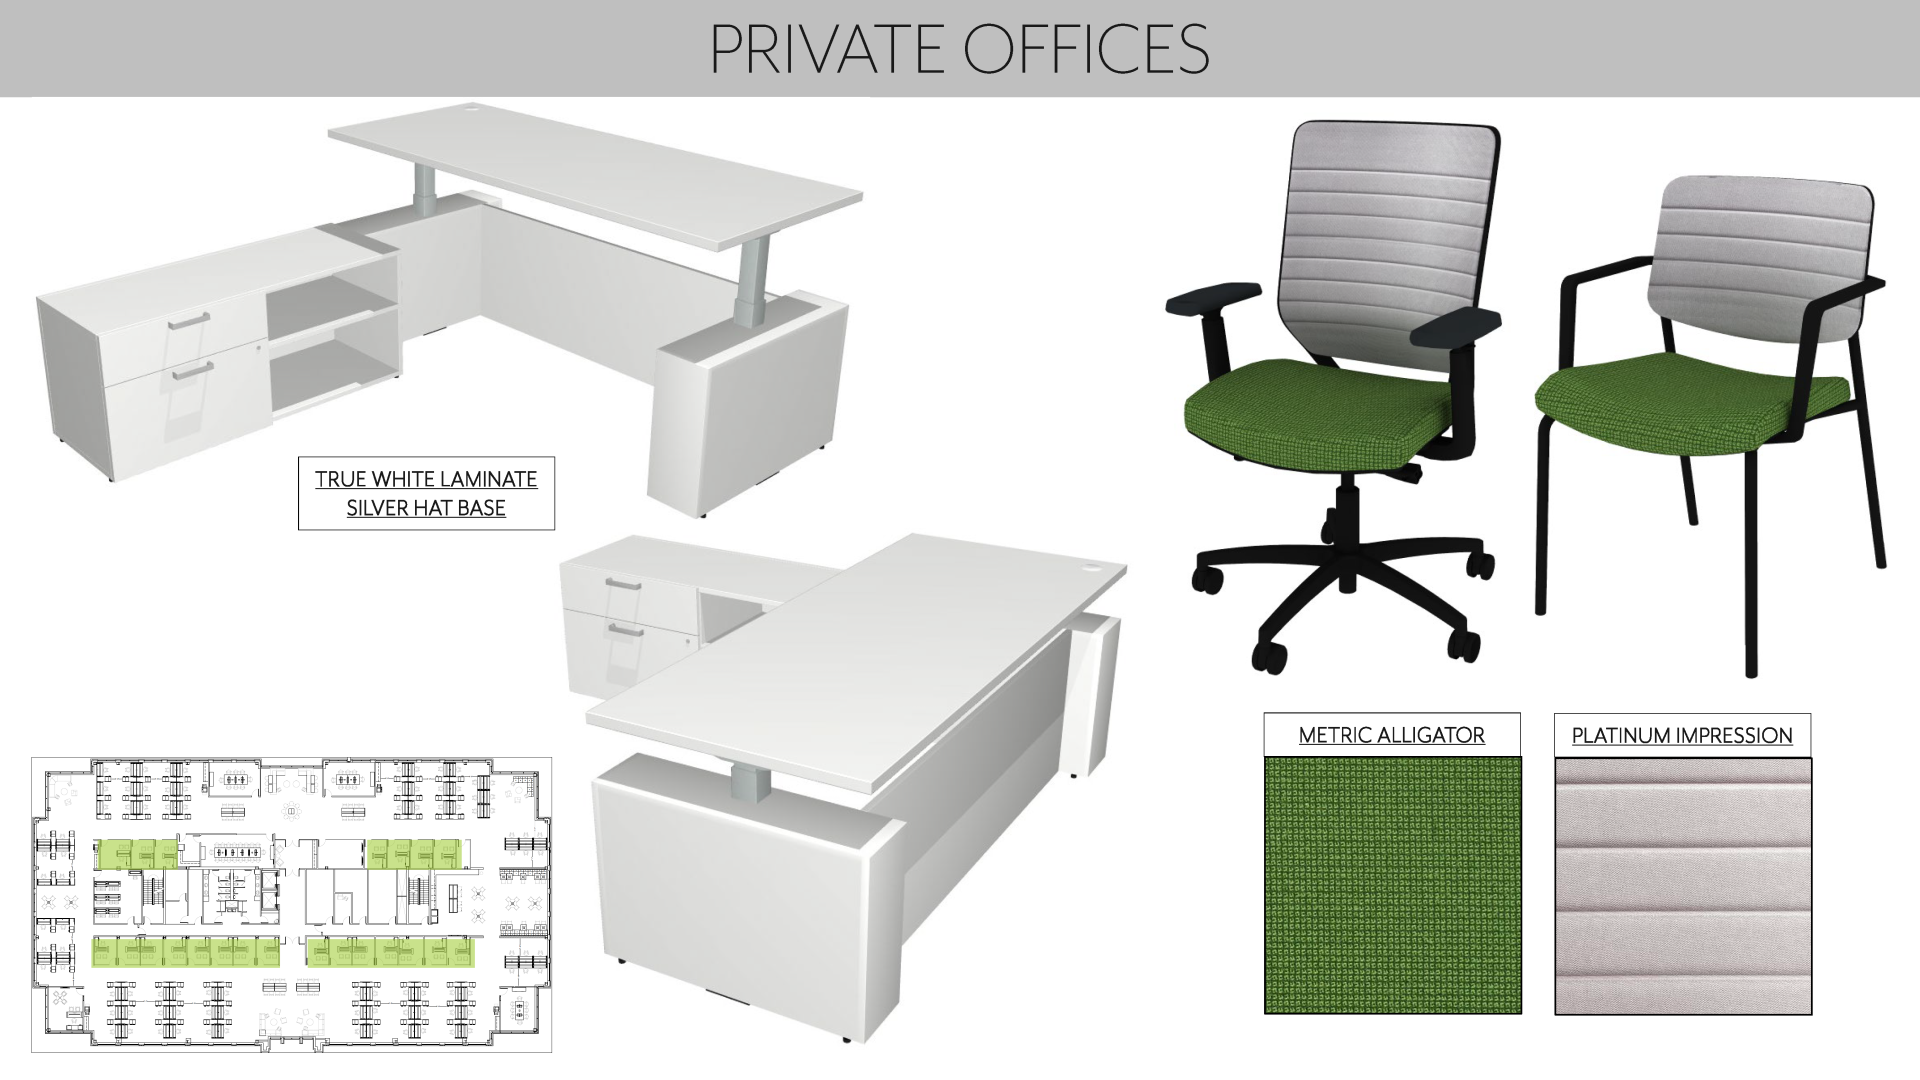 Private office layout